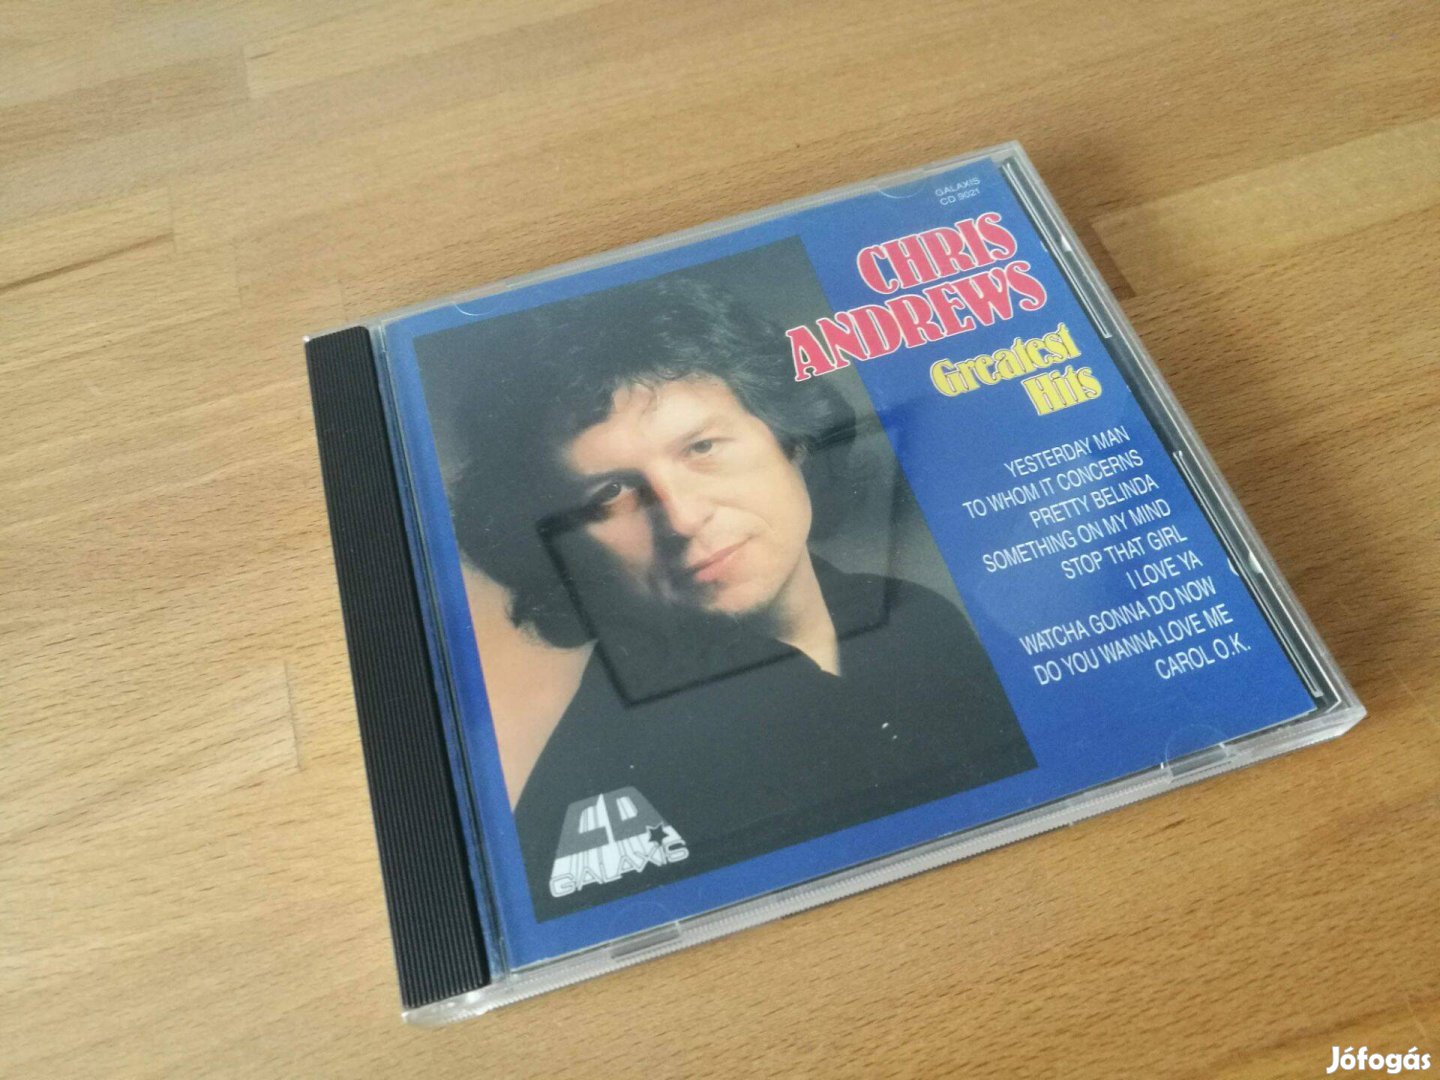 Chris Andrews - Greatest hits (Galaxis, NSZK, 1987, CD)